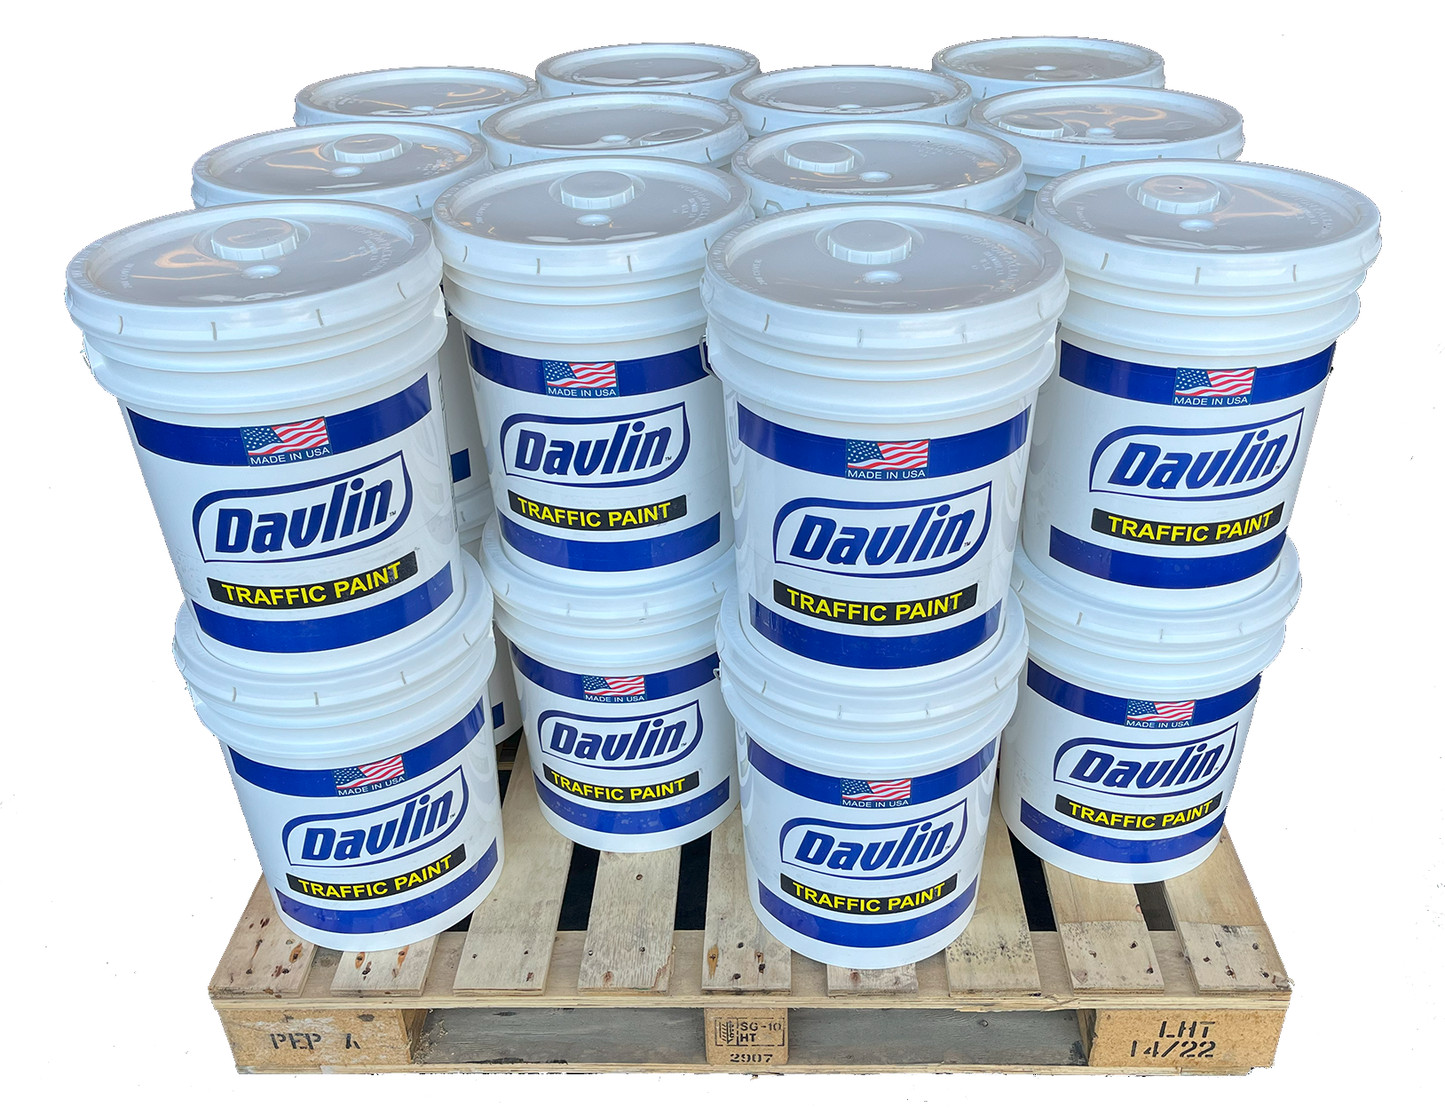 Traffic Paint In Bulk - Whole Pallet 24 x 5 gal Bucket - Free Shipping - Traffic Marking Paint - White, Yellow, Red, Black, Blue, Green